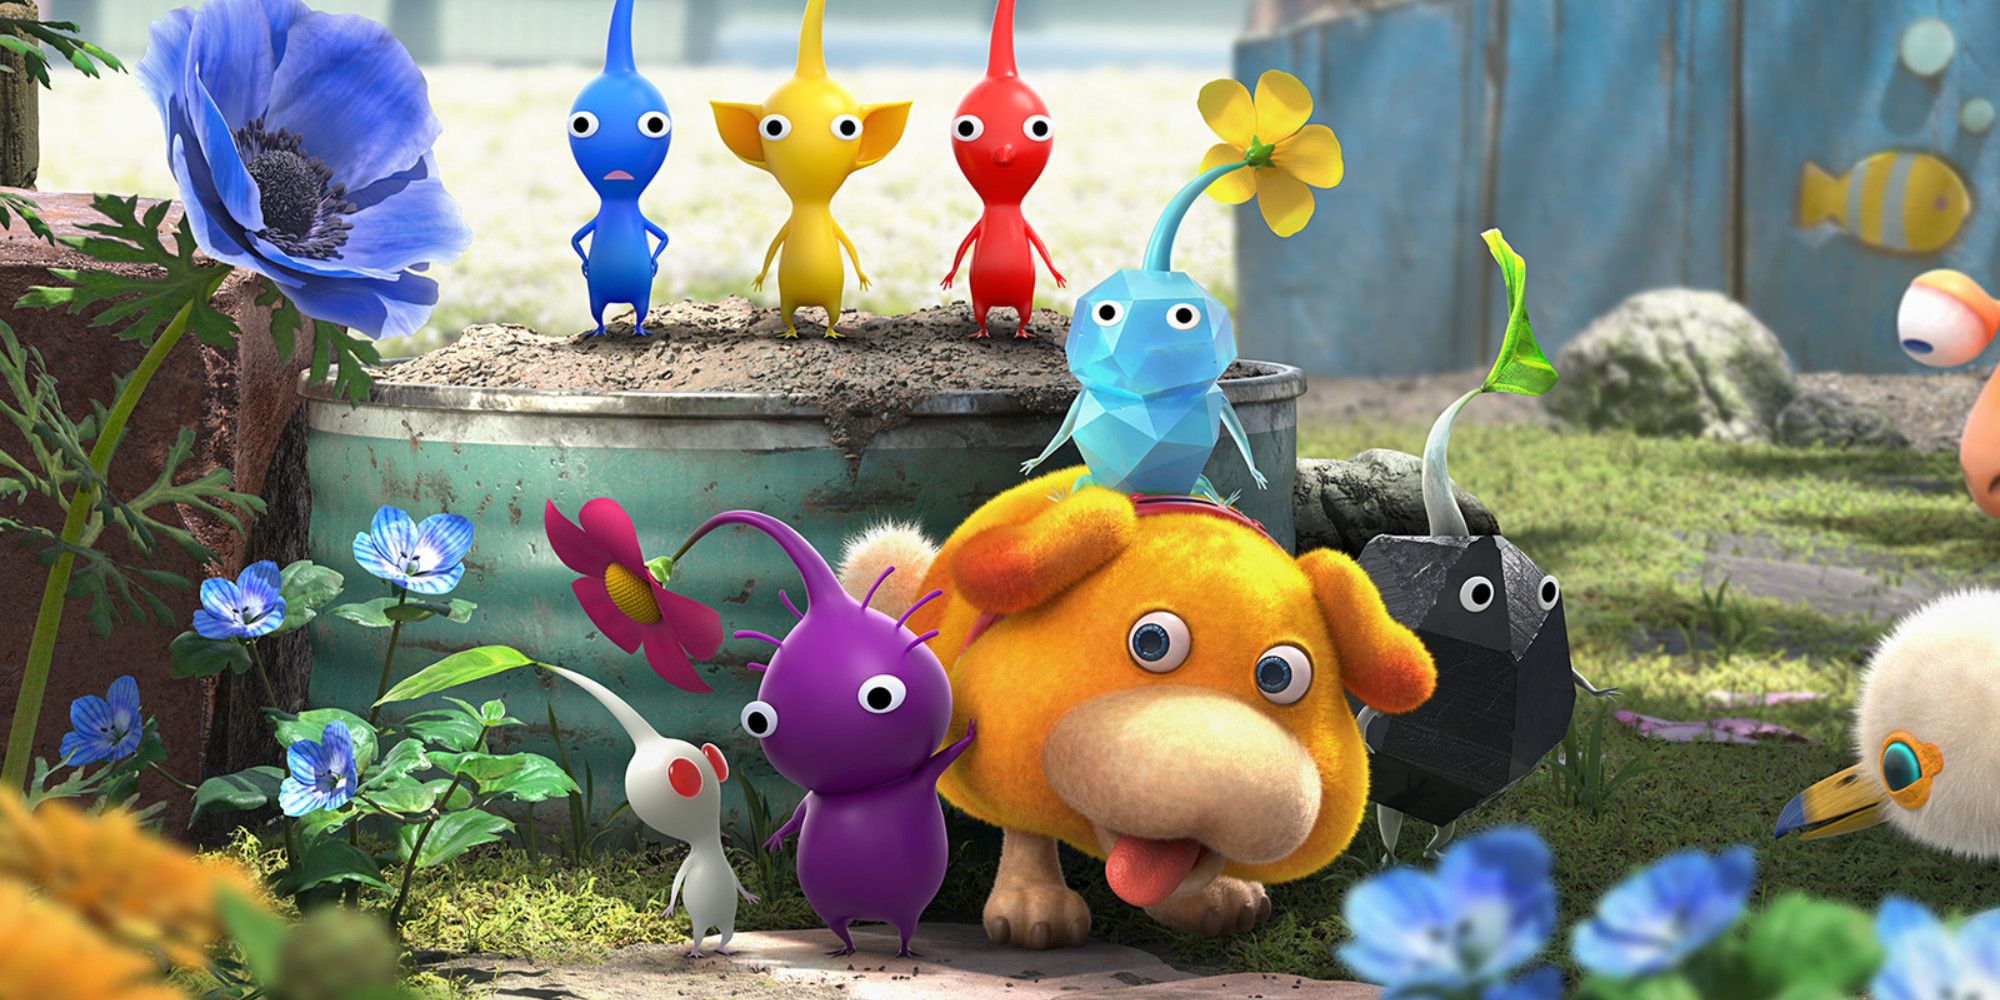 pikmin-4-fans-are-upset-over-lackluster-story-co-op-mode